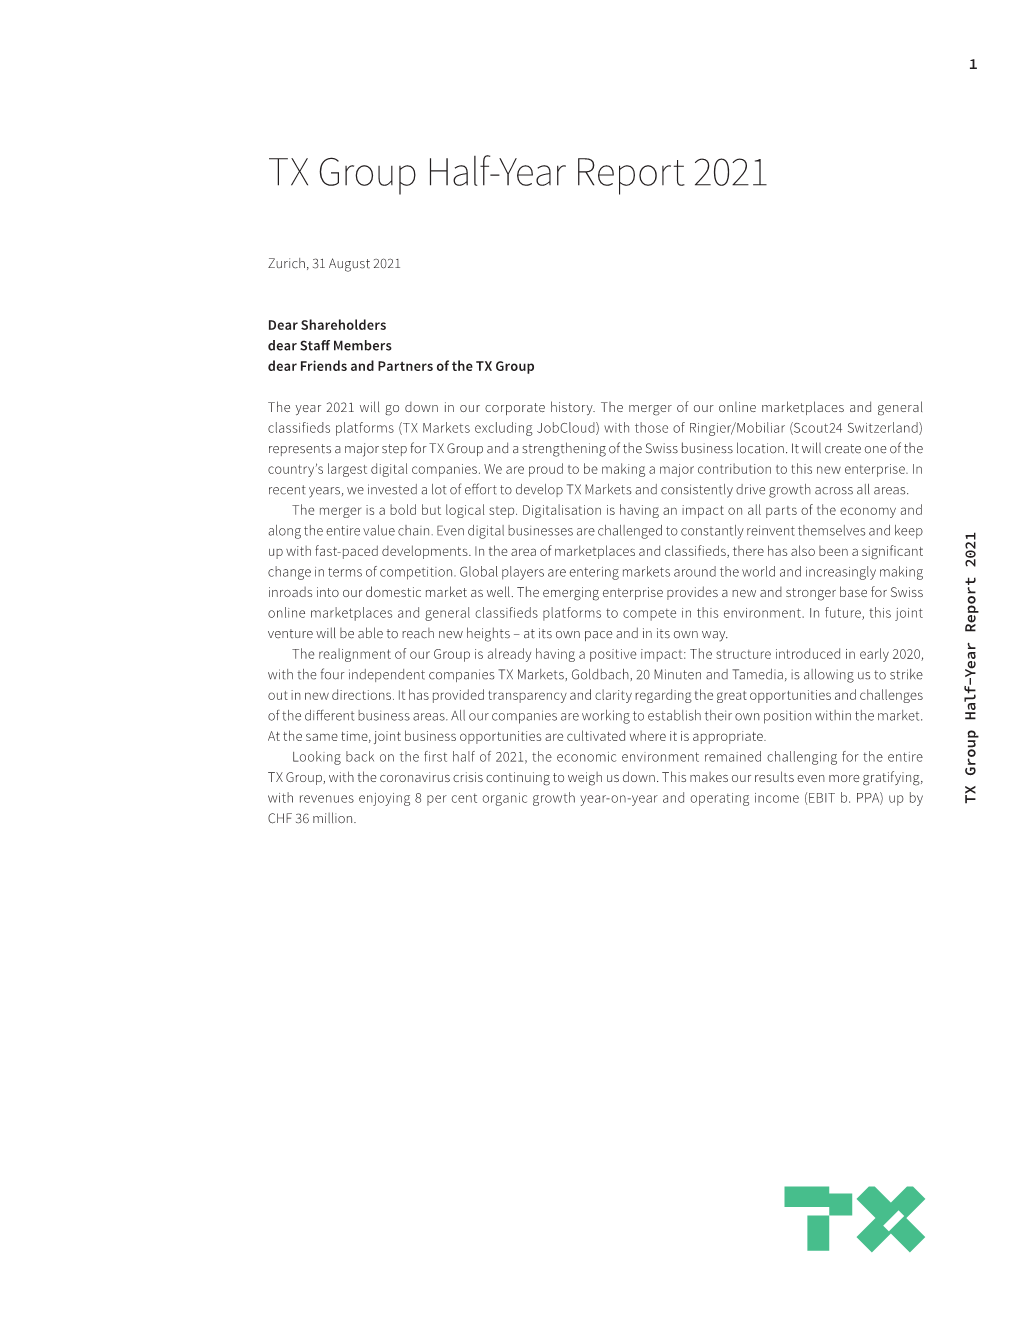 TX Group Half-Year Report 2021